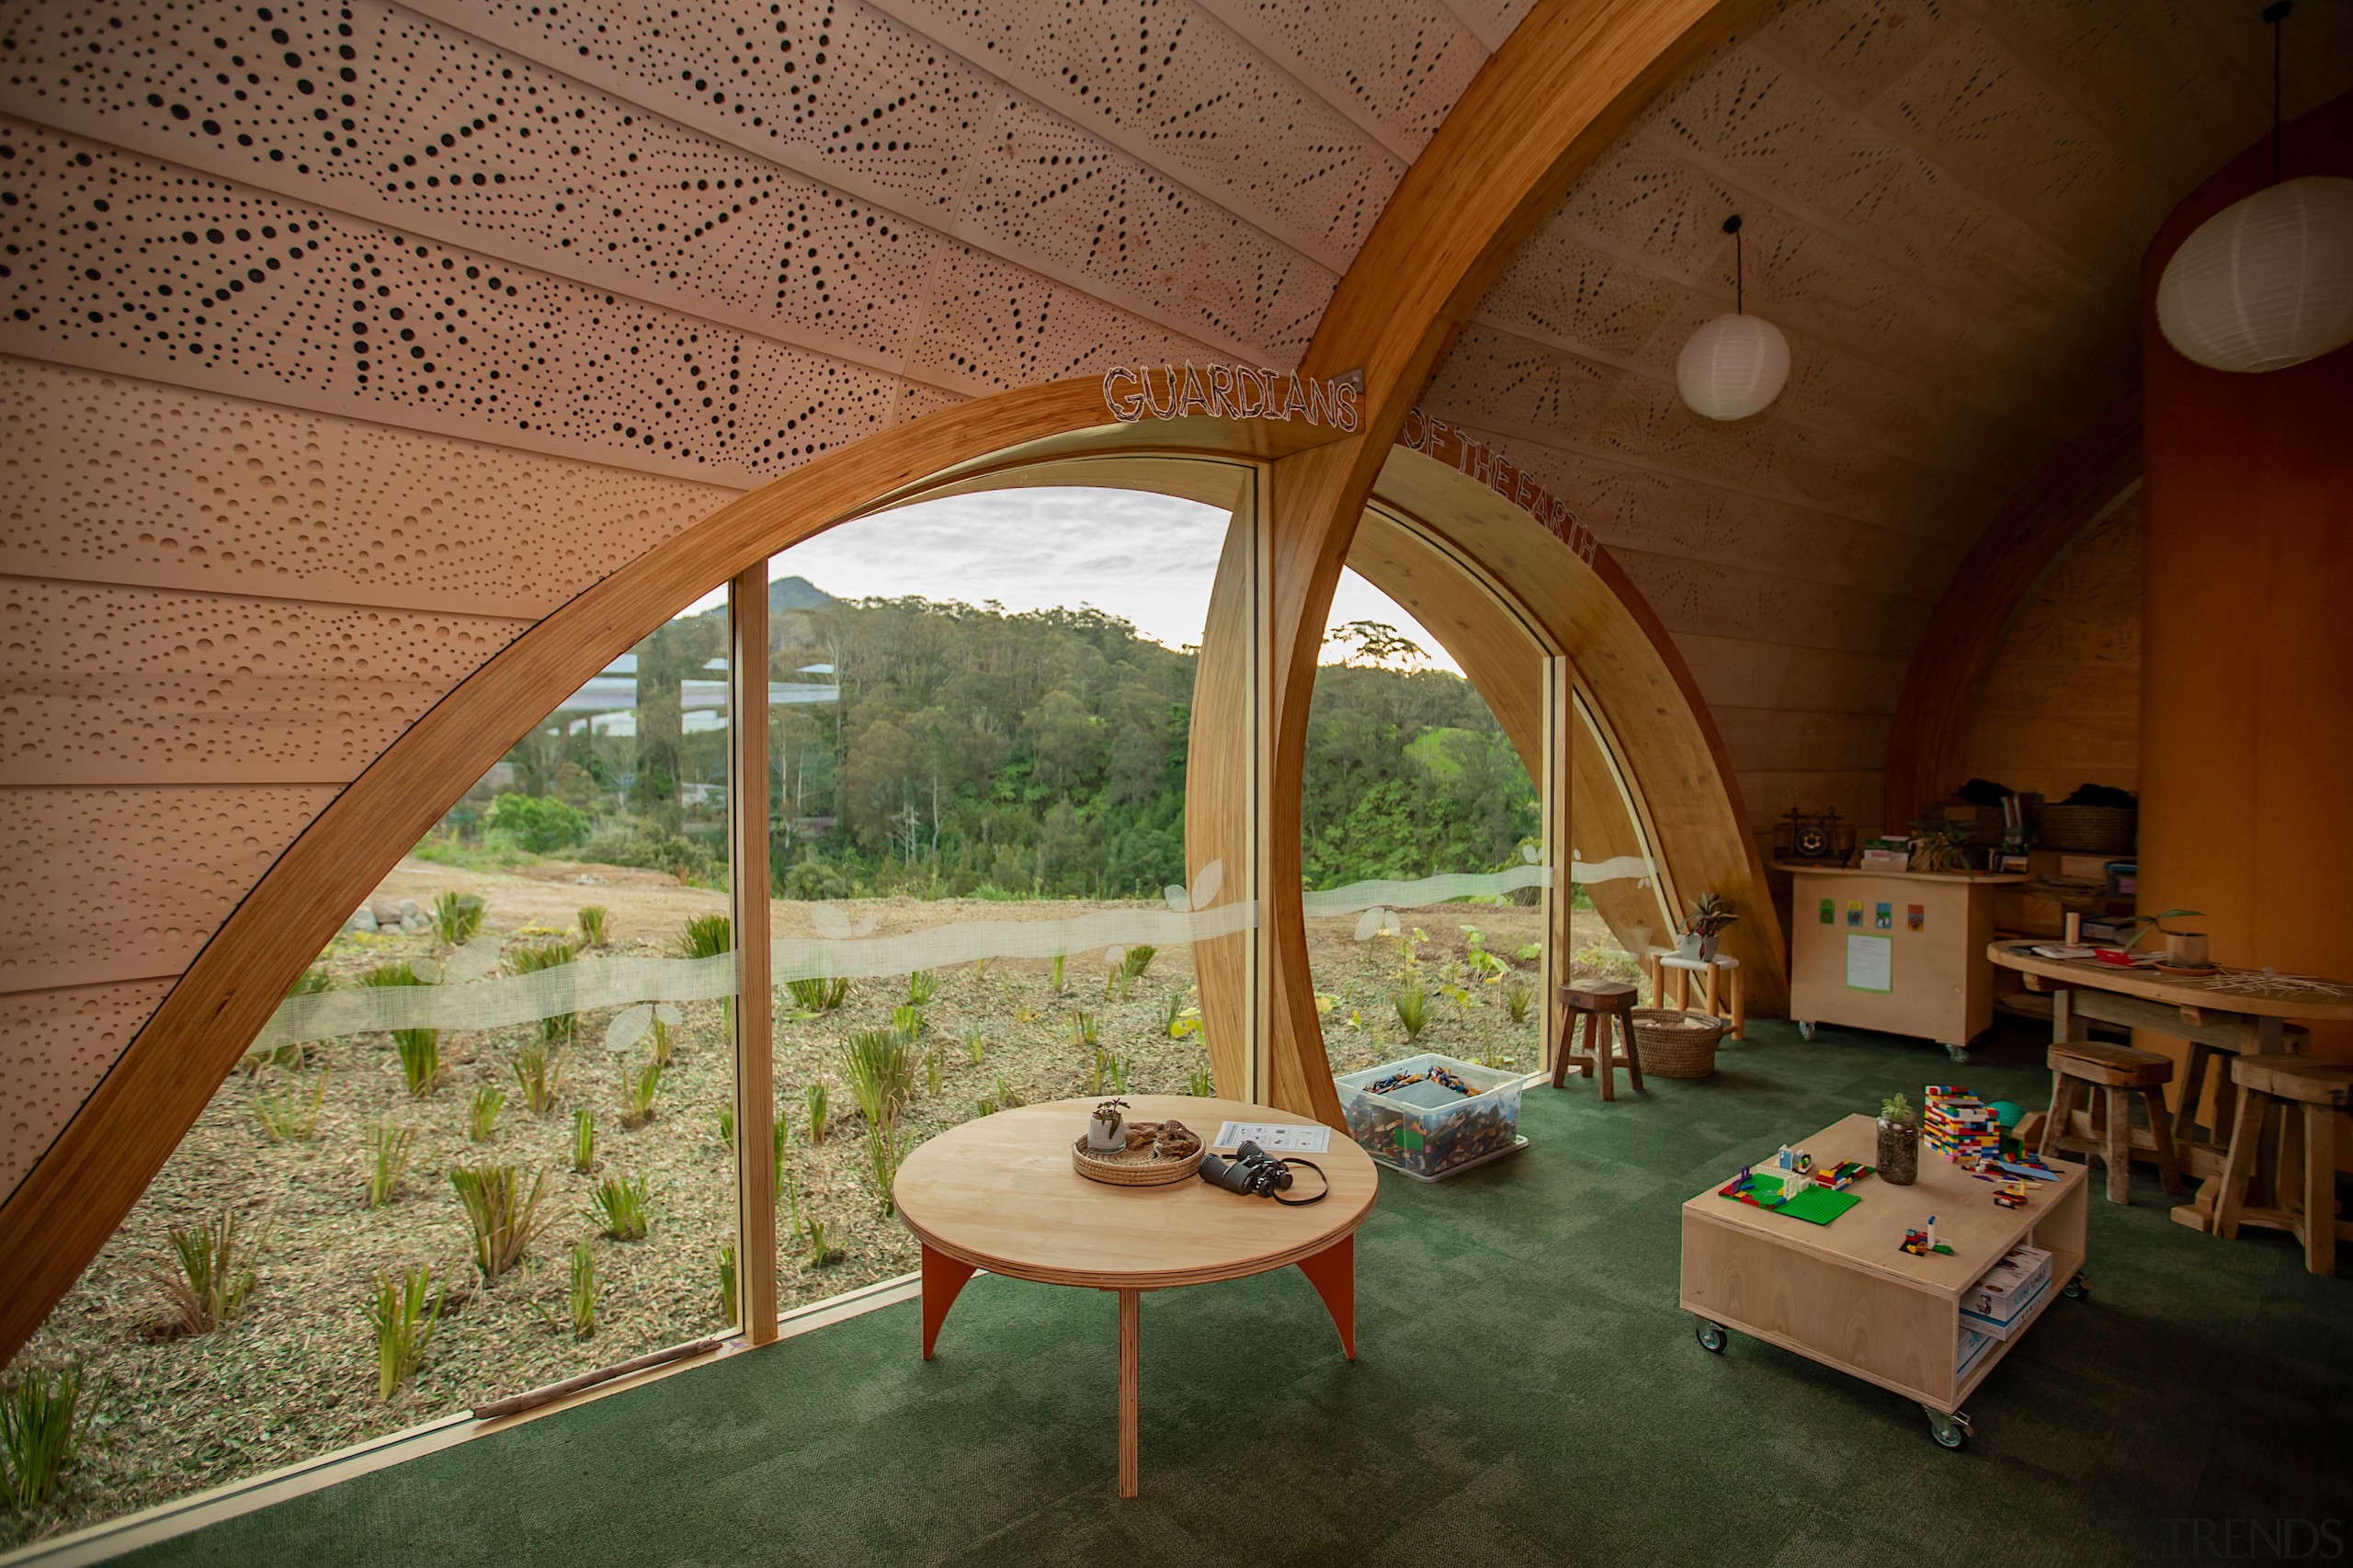 Curved timber shapes are predominant in the architecture 